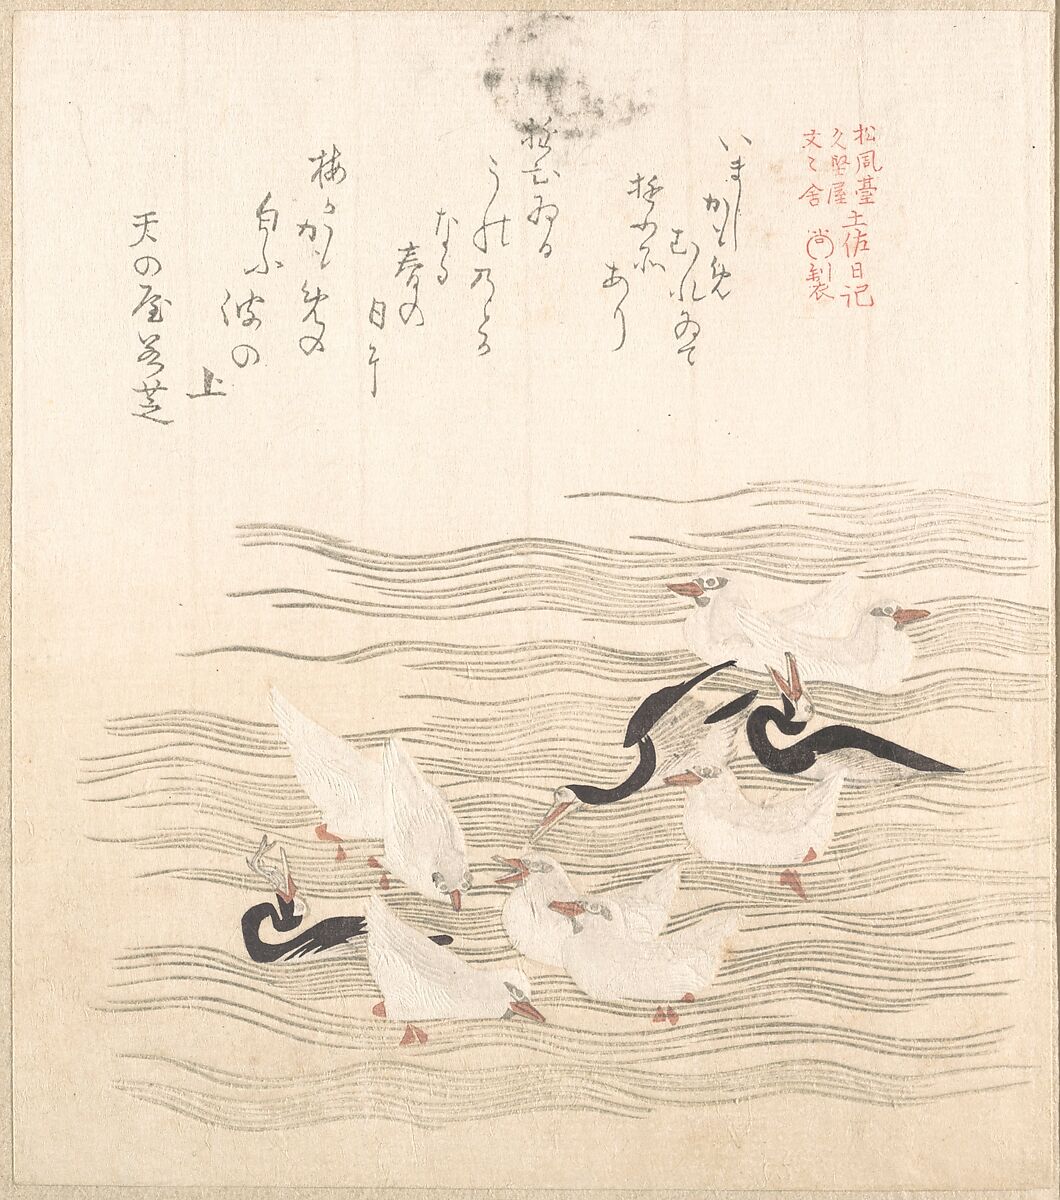 Sea-Gulls Playing on the Water, Kubo Shunman (Japanese, 1757–1820) (?), Woodblock print (surimono); ink and color on paper, Japan 